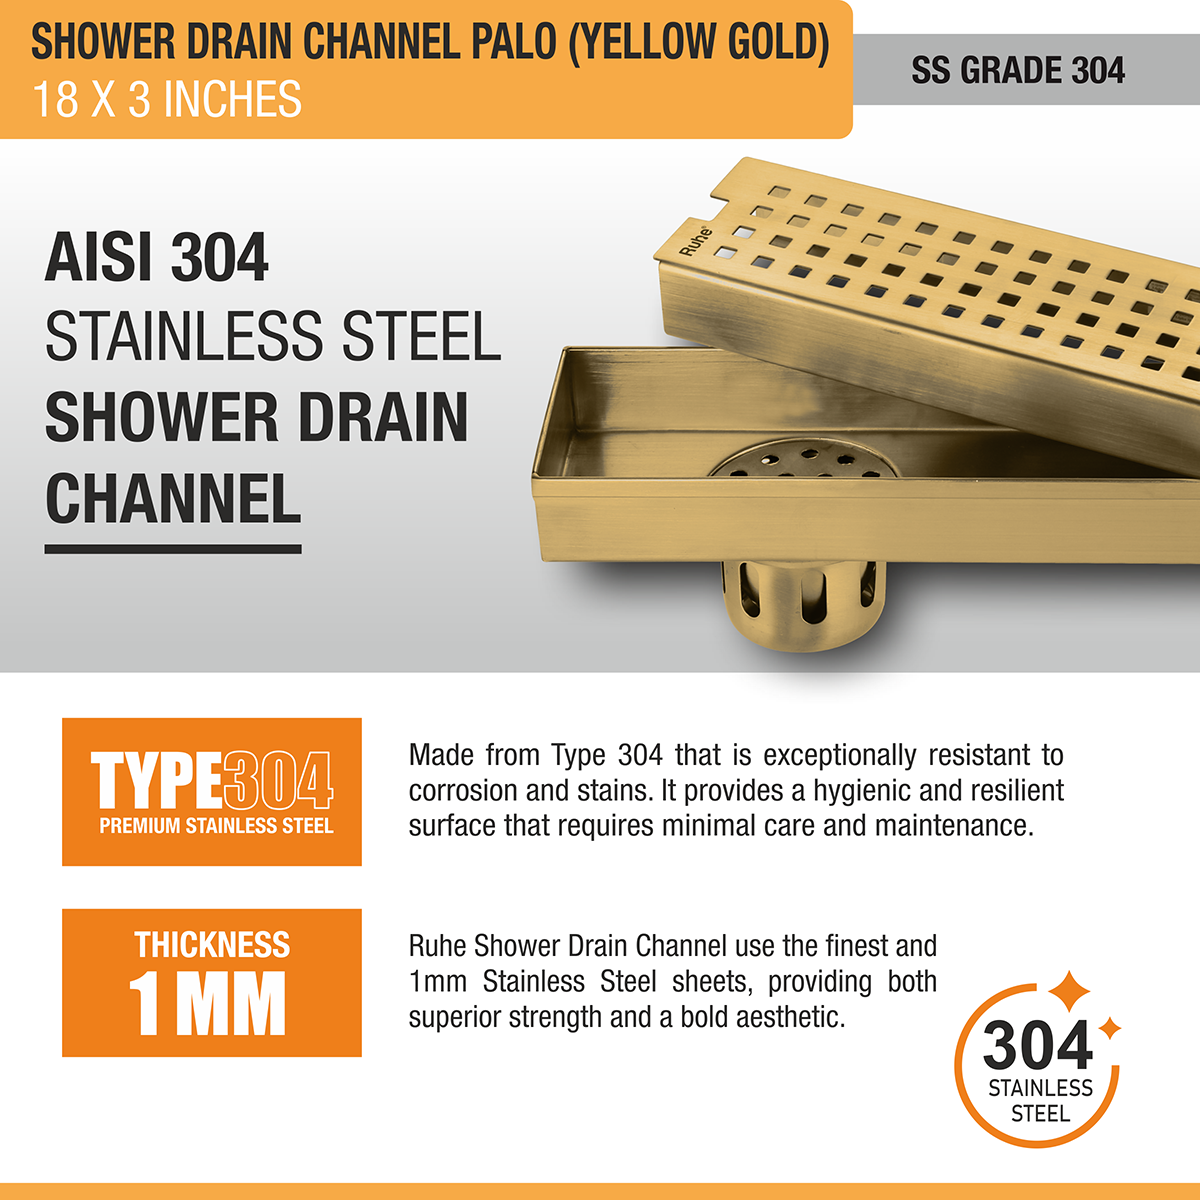 Palo Shower Drain Channel (18 x 3 Inches) YELLOW GOLD stainless steel